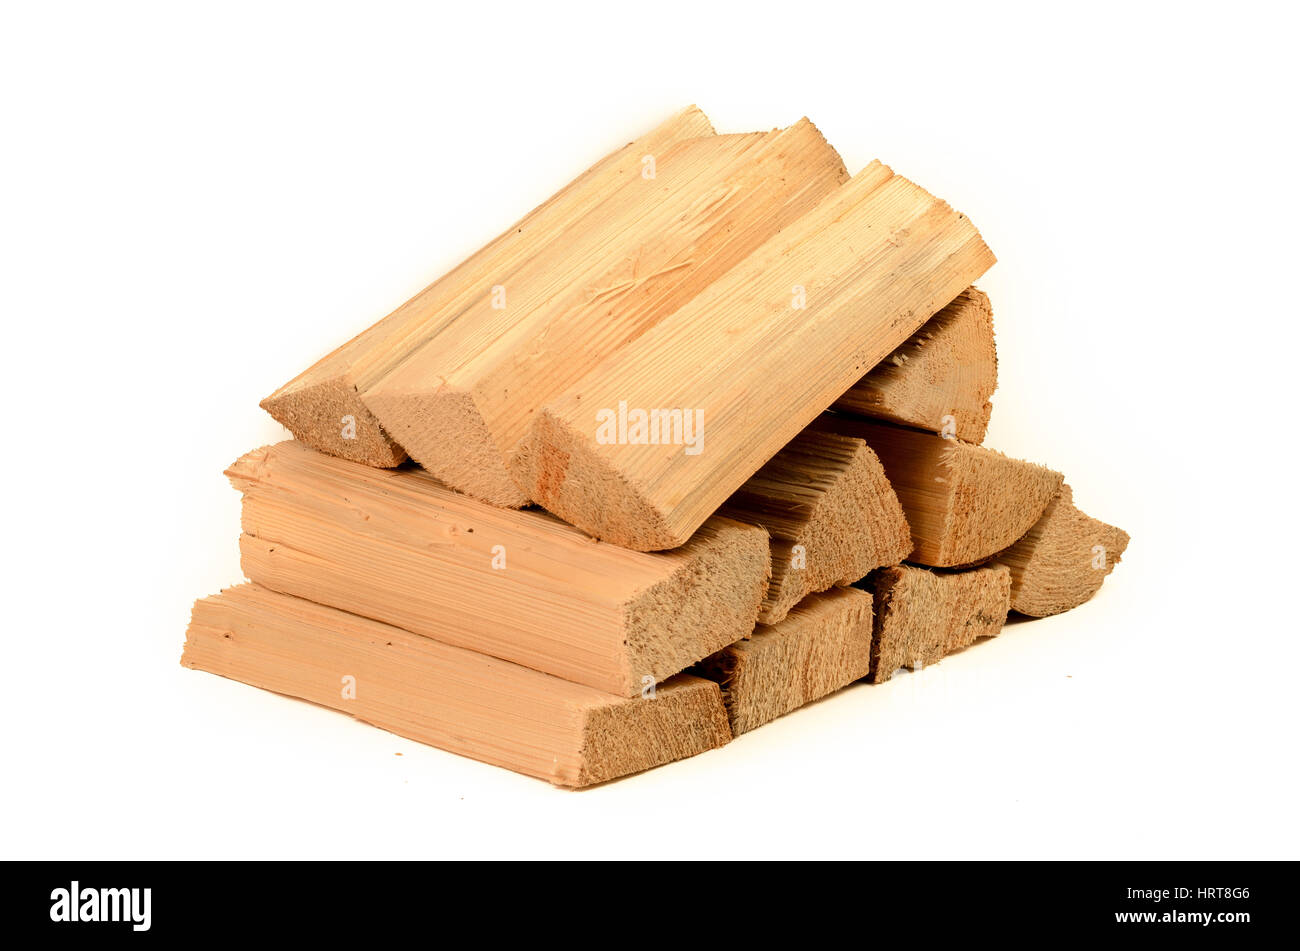 Brush wood furniture Cut Out Stock Images & Pictures - Alamy